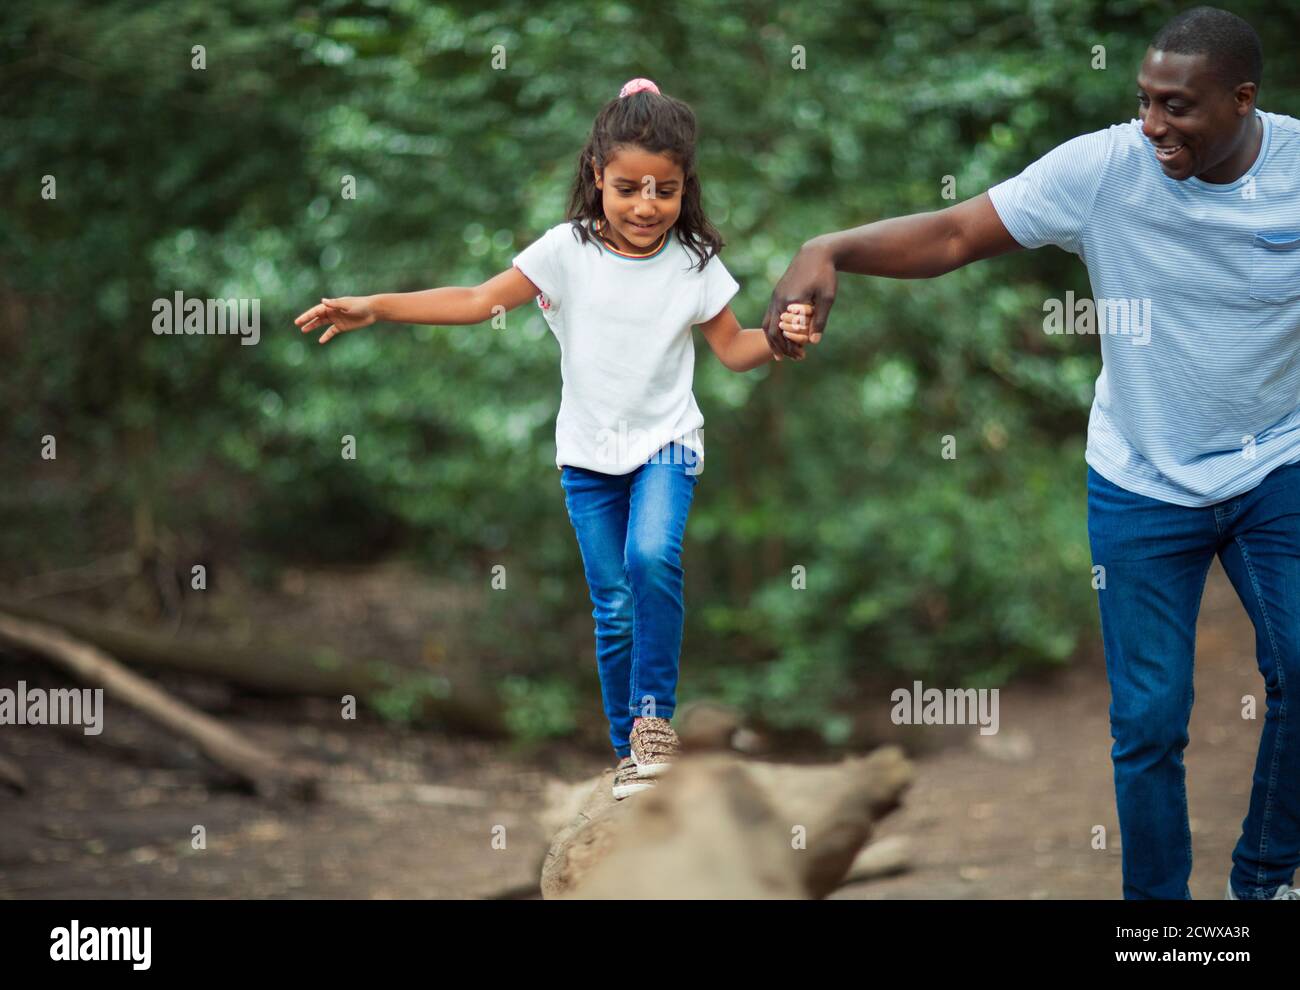 Father helping daughter balance on fallen log in woods Stock Photo